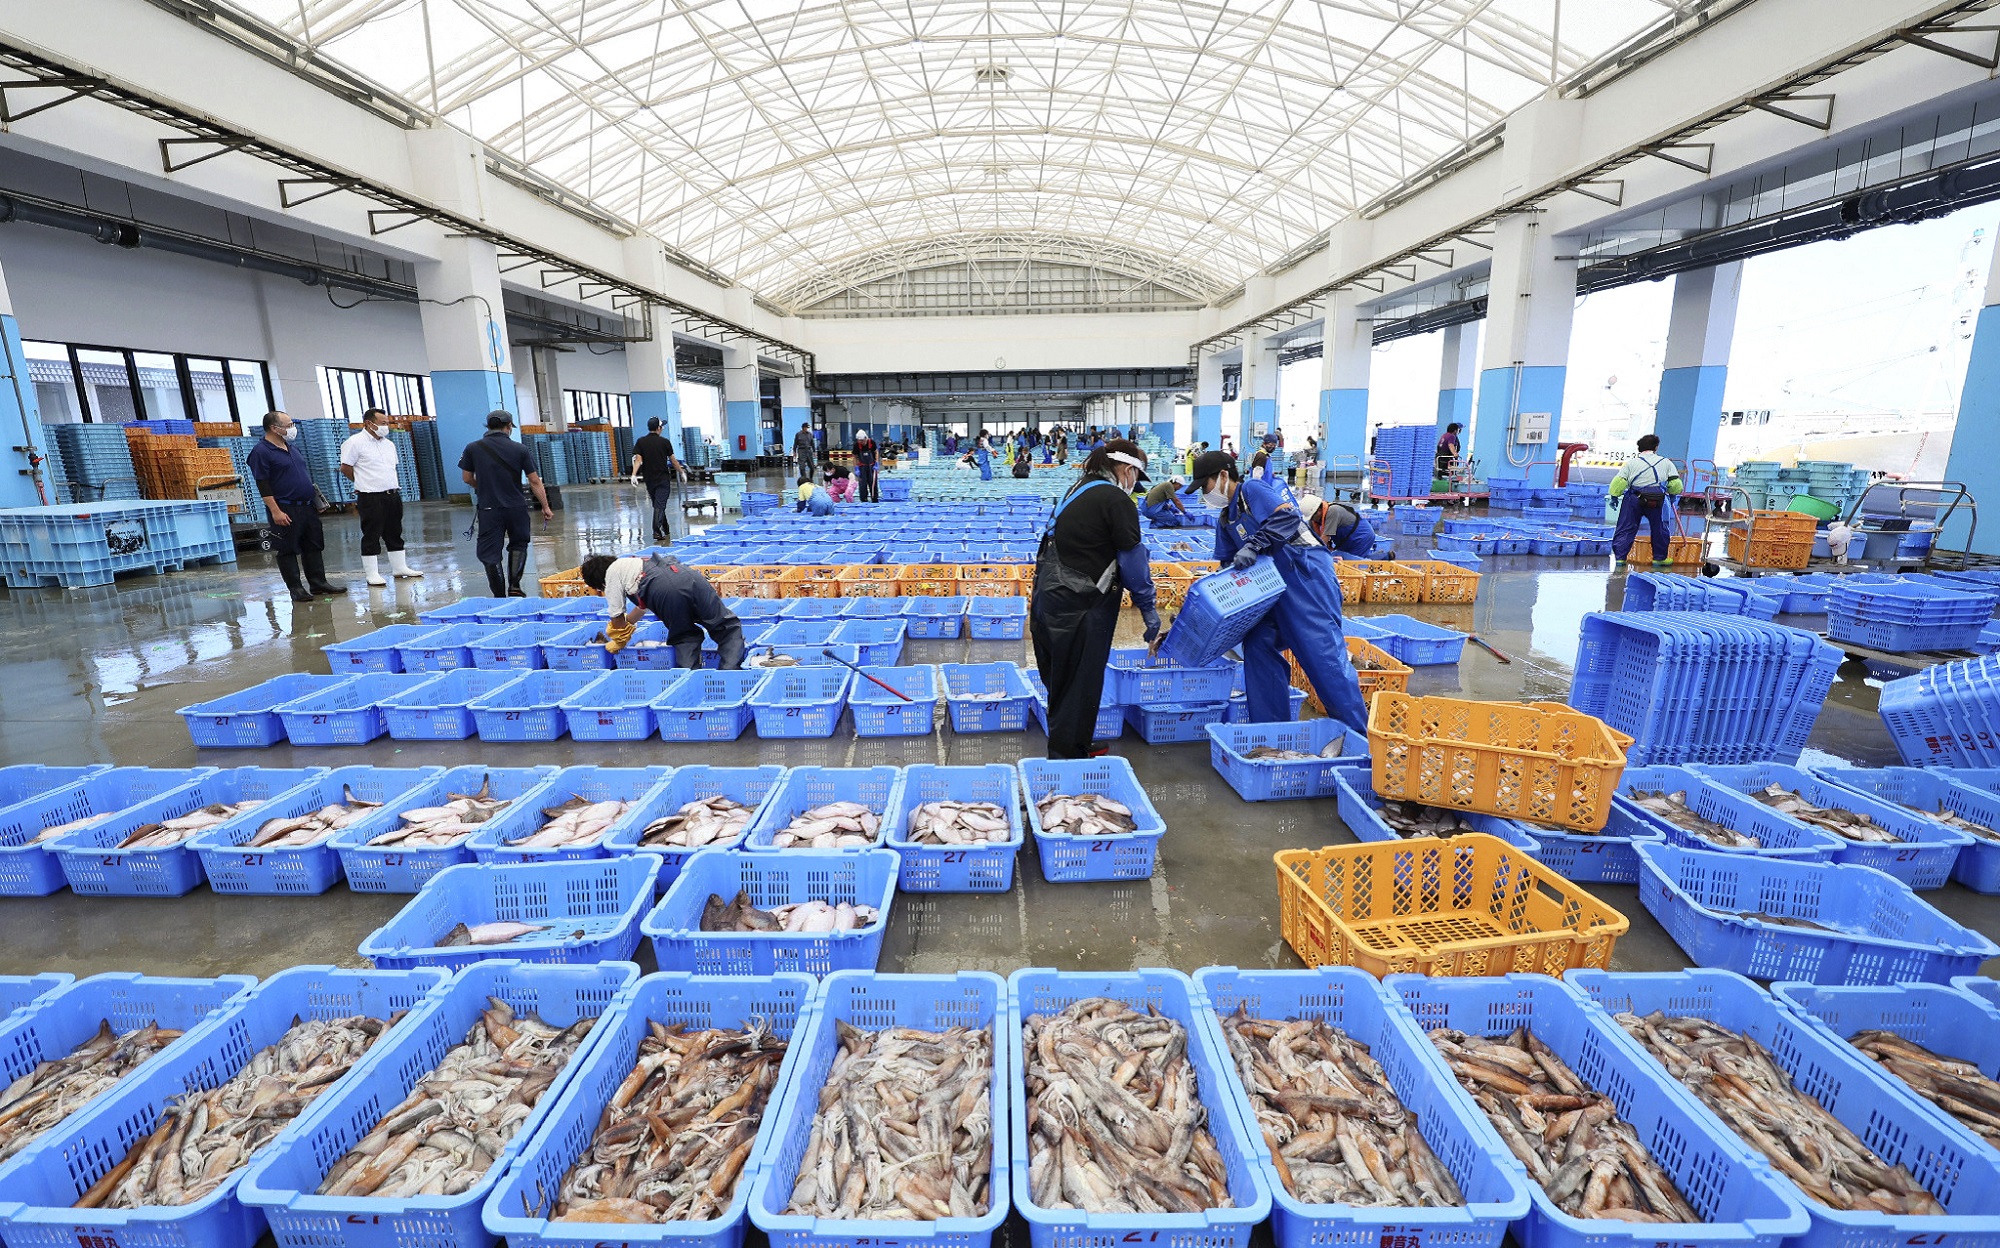 This nuclear byproduct is fueling debate over Fukushima’s seafood